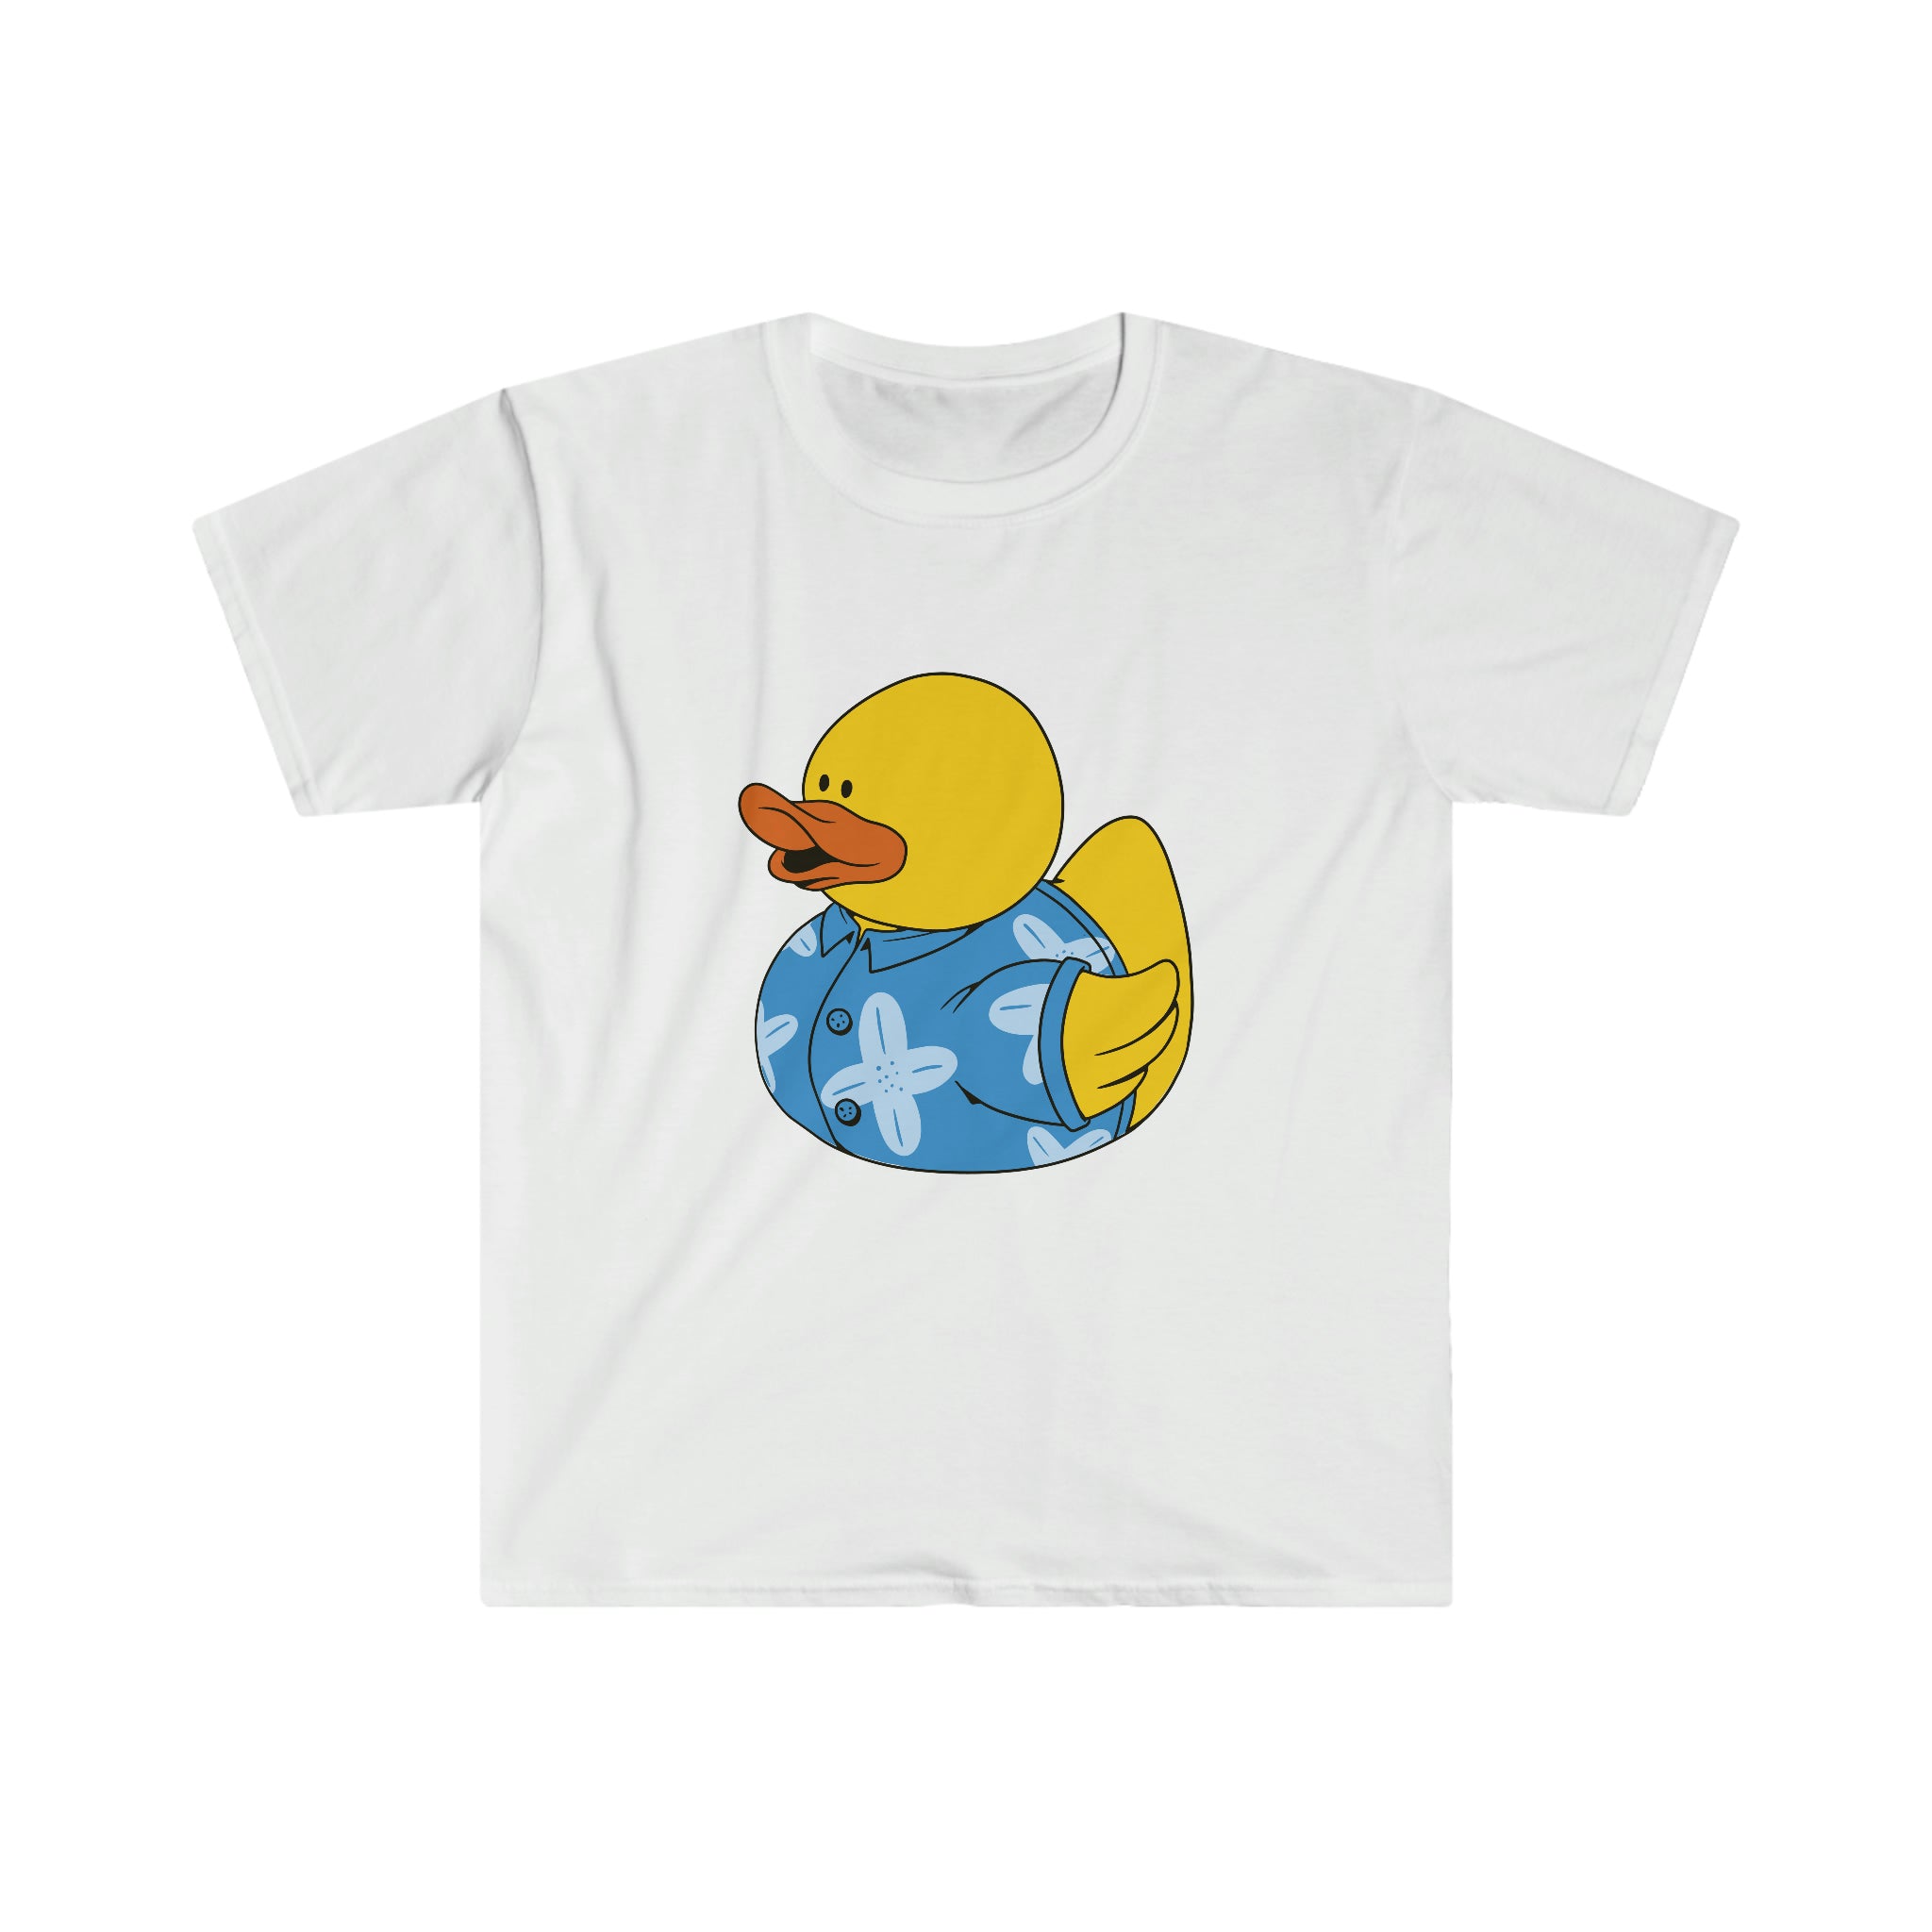 A Going to Hawaii Duck T-Shirt, perfect for a tropical getaway in Hawaii.